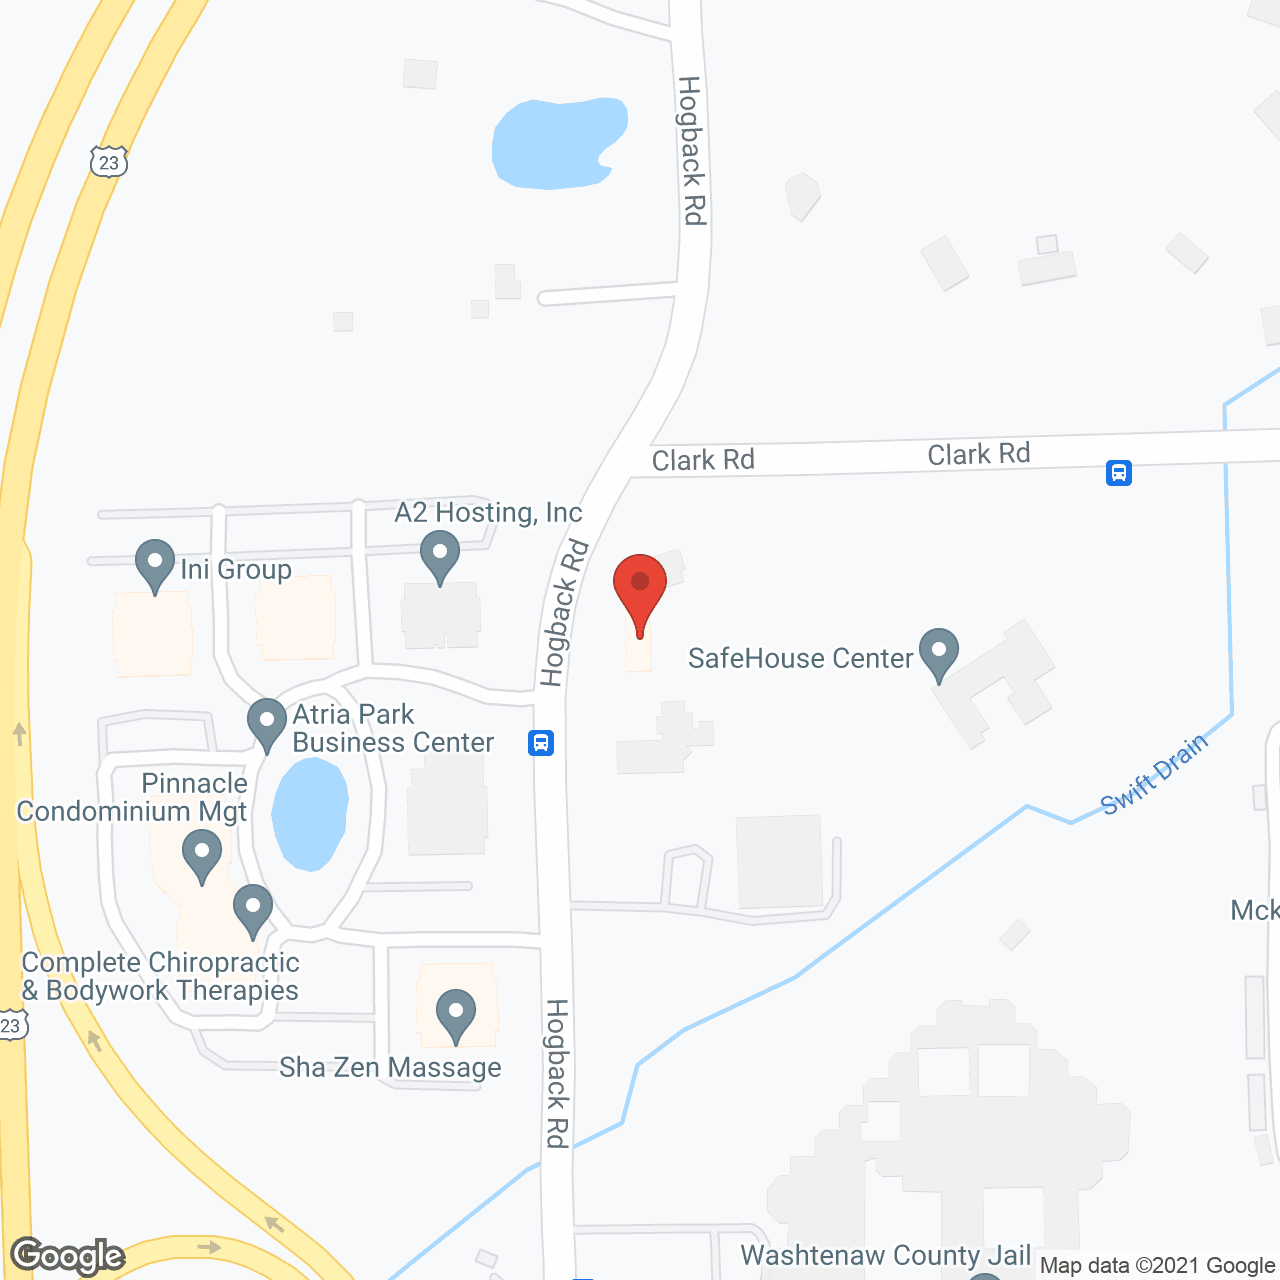 Friends of the Family Home Health - Ann Arbor, MI in google map